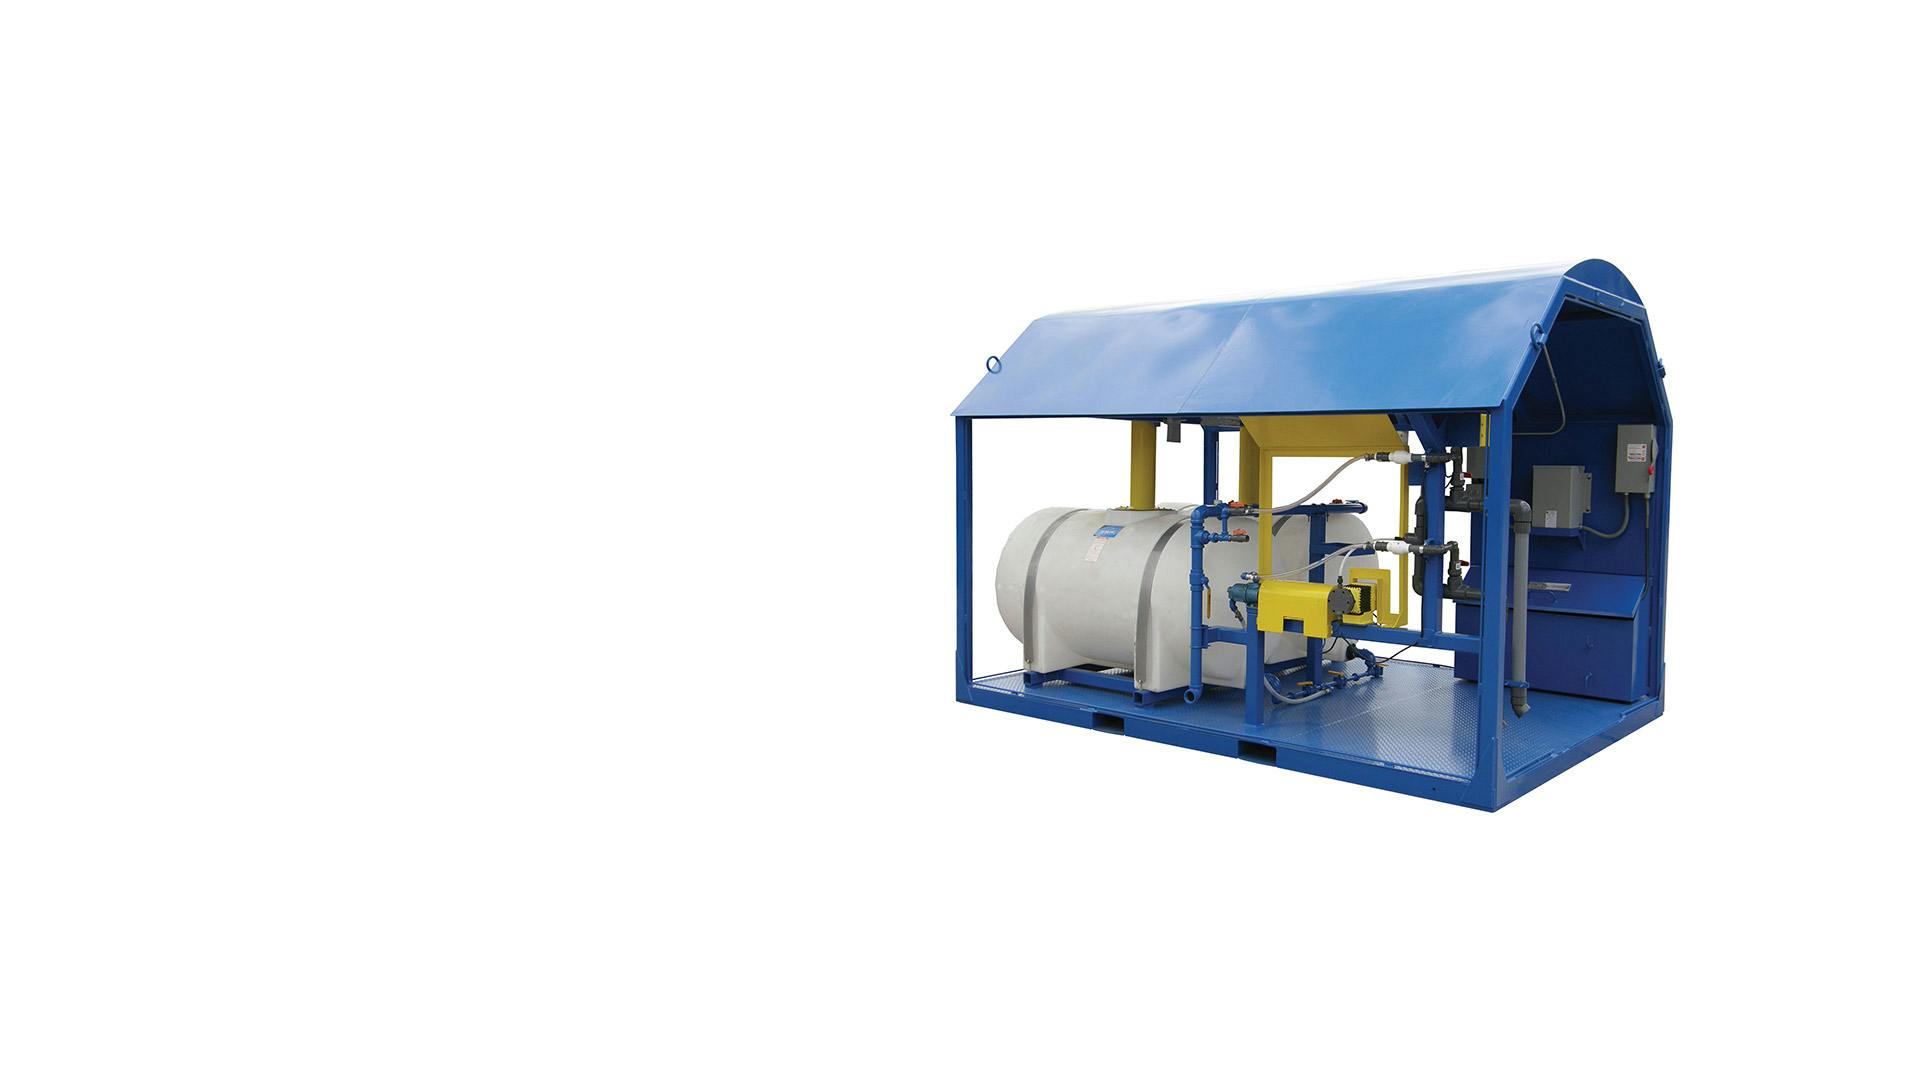 A render of a dewatering water-based drilling fluid system from a back angle